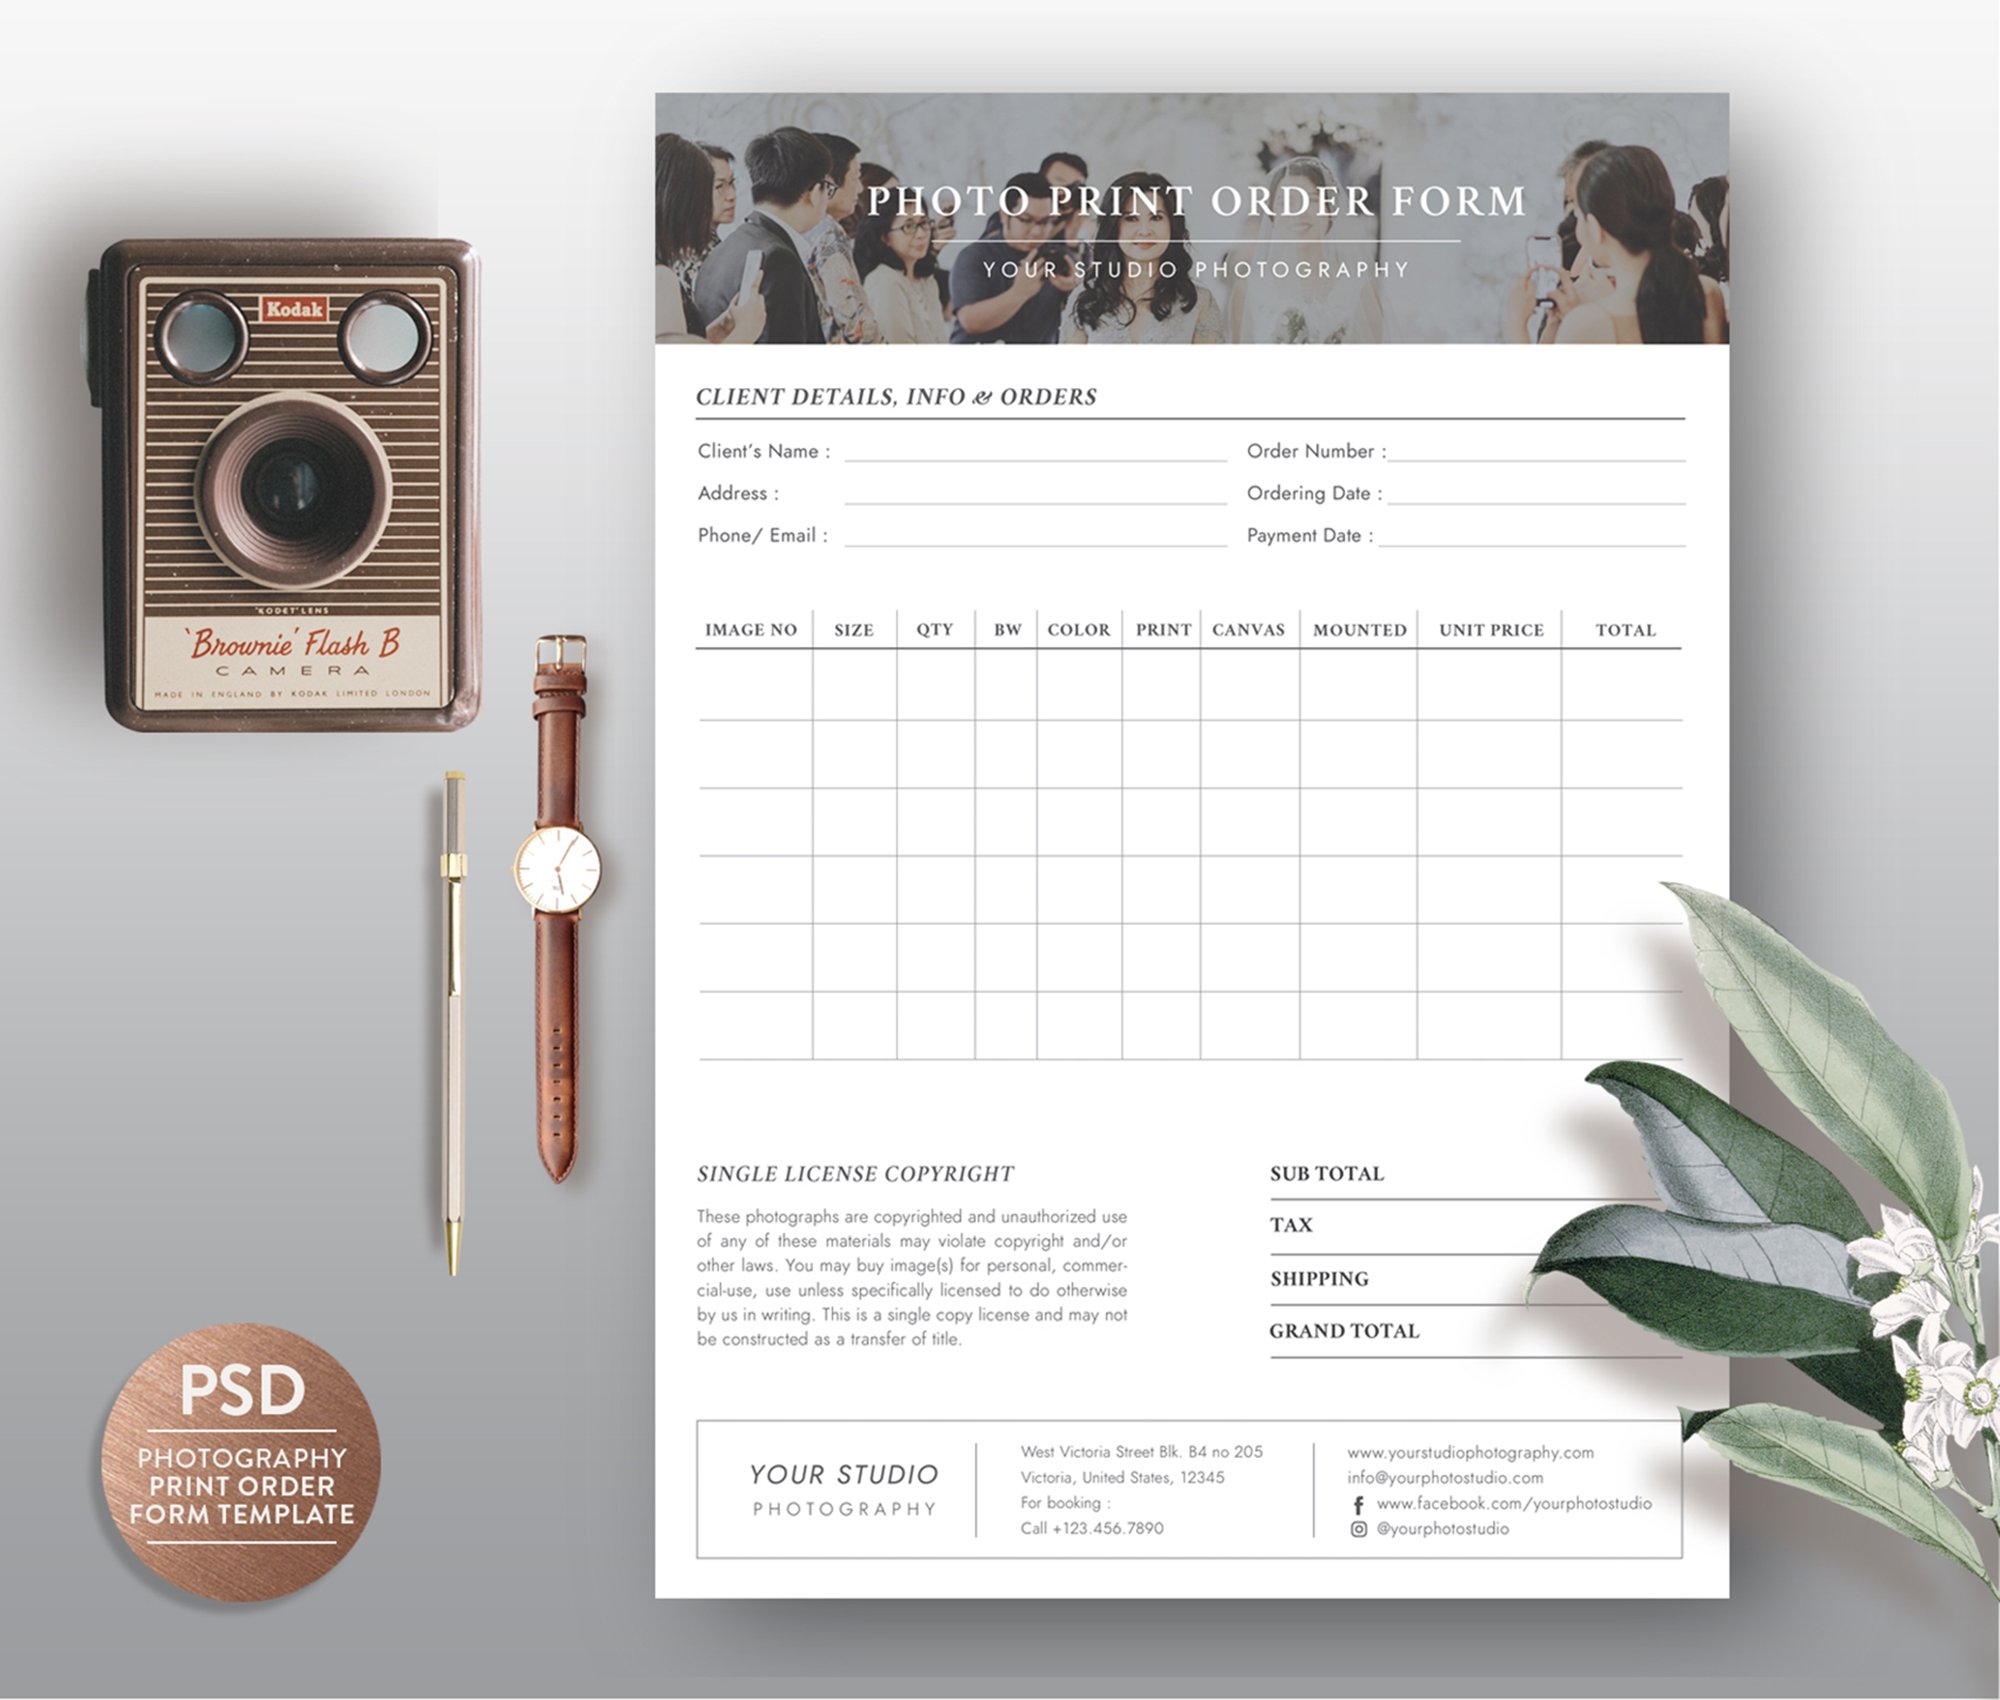 Photo Print Order Form Template cover image.